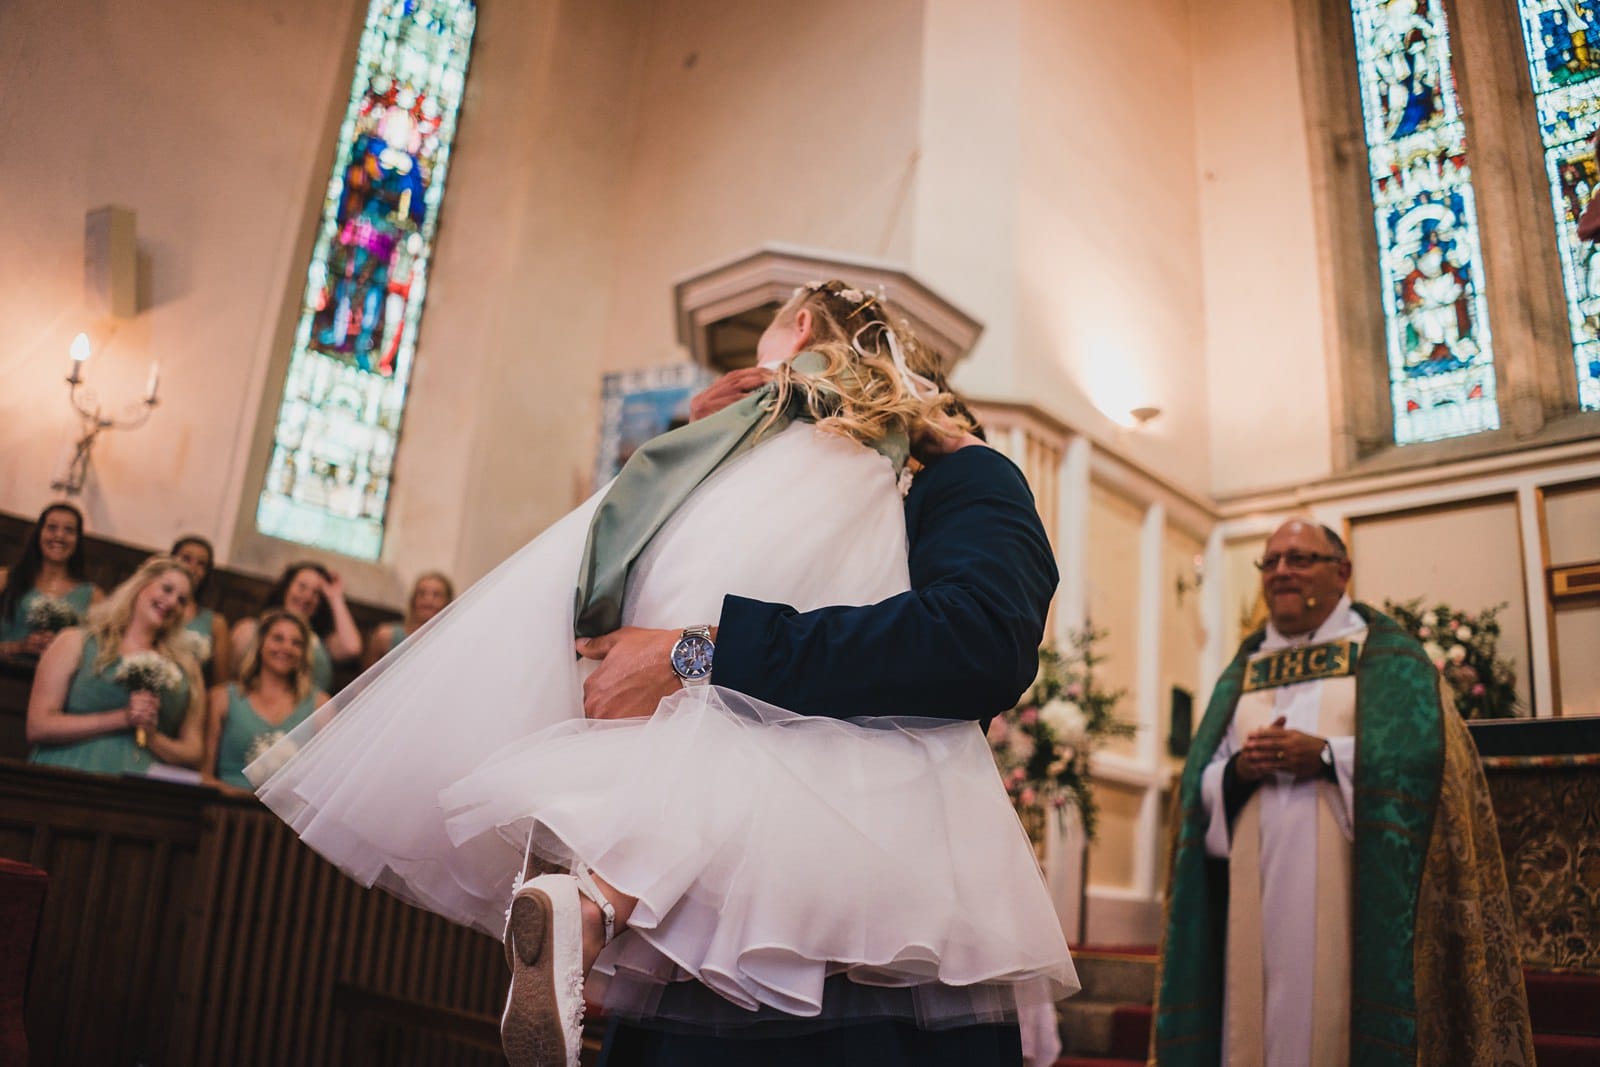 Wedding Photography on the Isles of Scilly